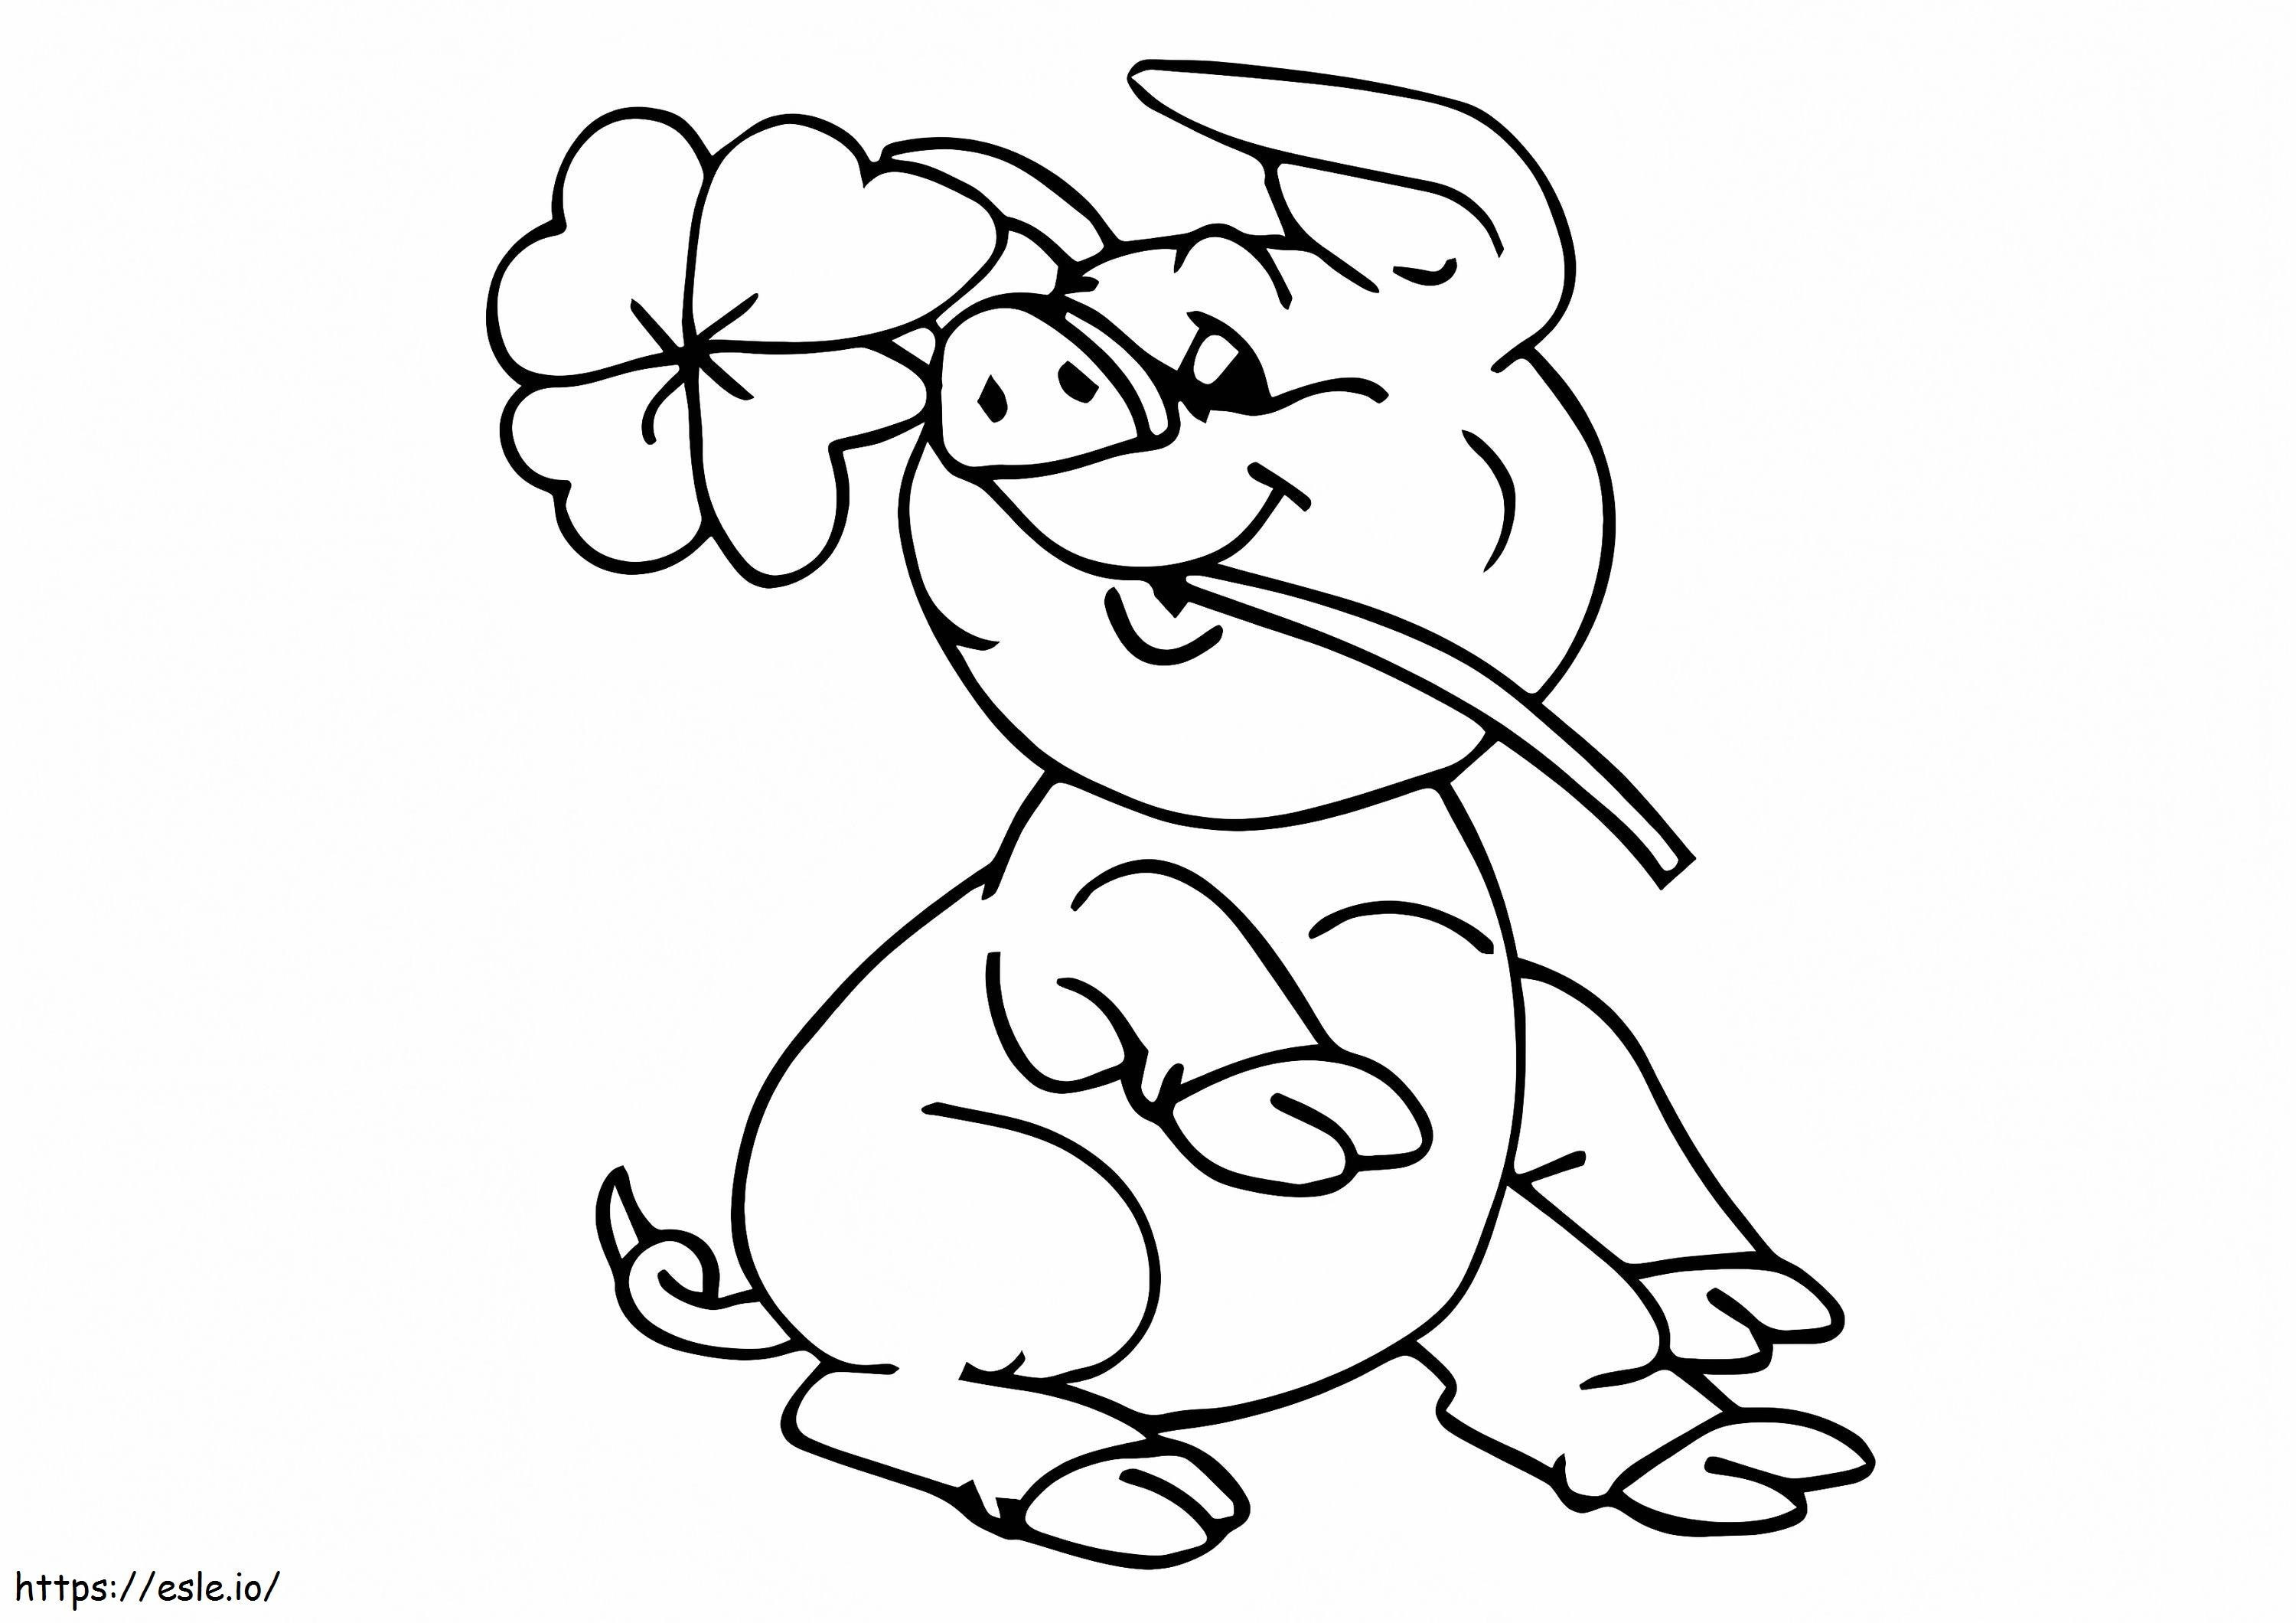 1530581945 The Pig With Four Leaf Clover A4 E1600446724727 coloring page